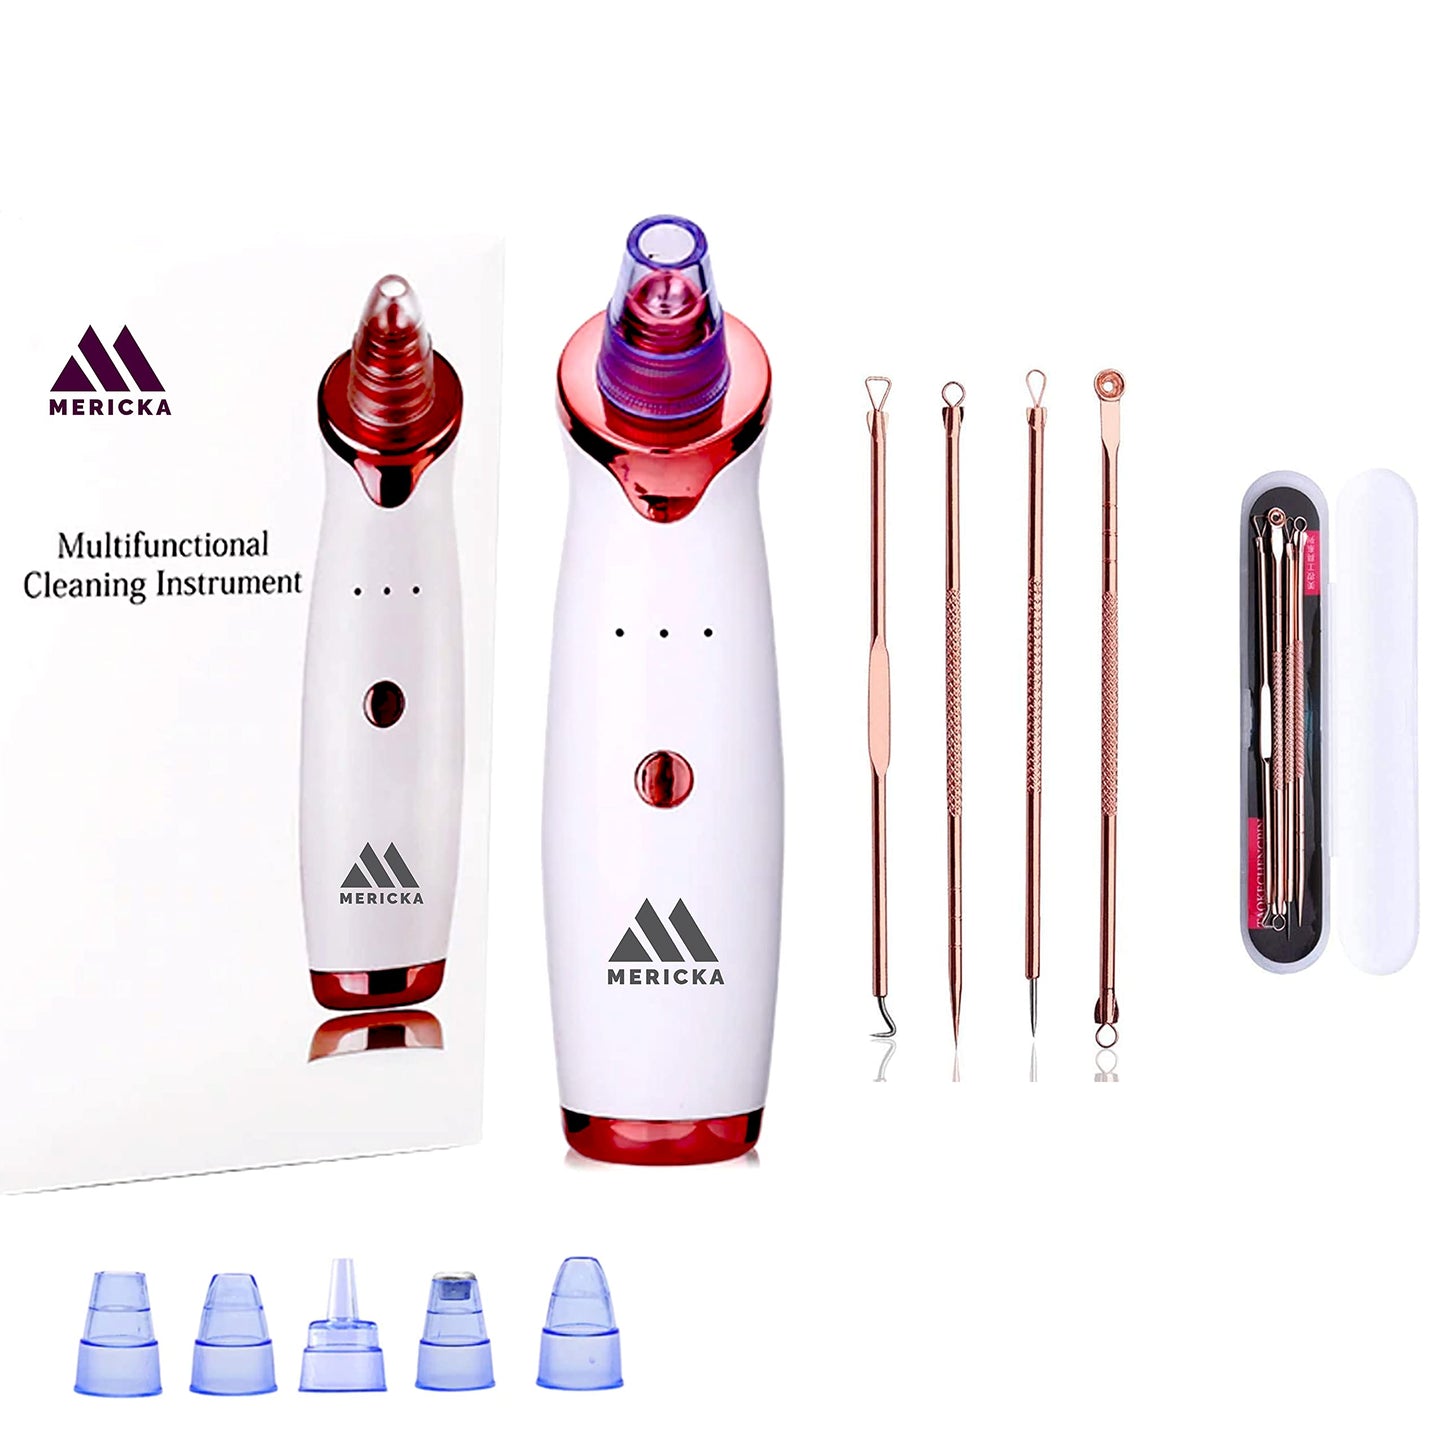 Mericka - Pack of one Professional Blackhead Remover Vacuum Suction Facial Pore Cleaner Acne Comedone Extractor Kit with 4 Suction Head with Blackhead Extraction kit for Men & Women